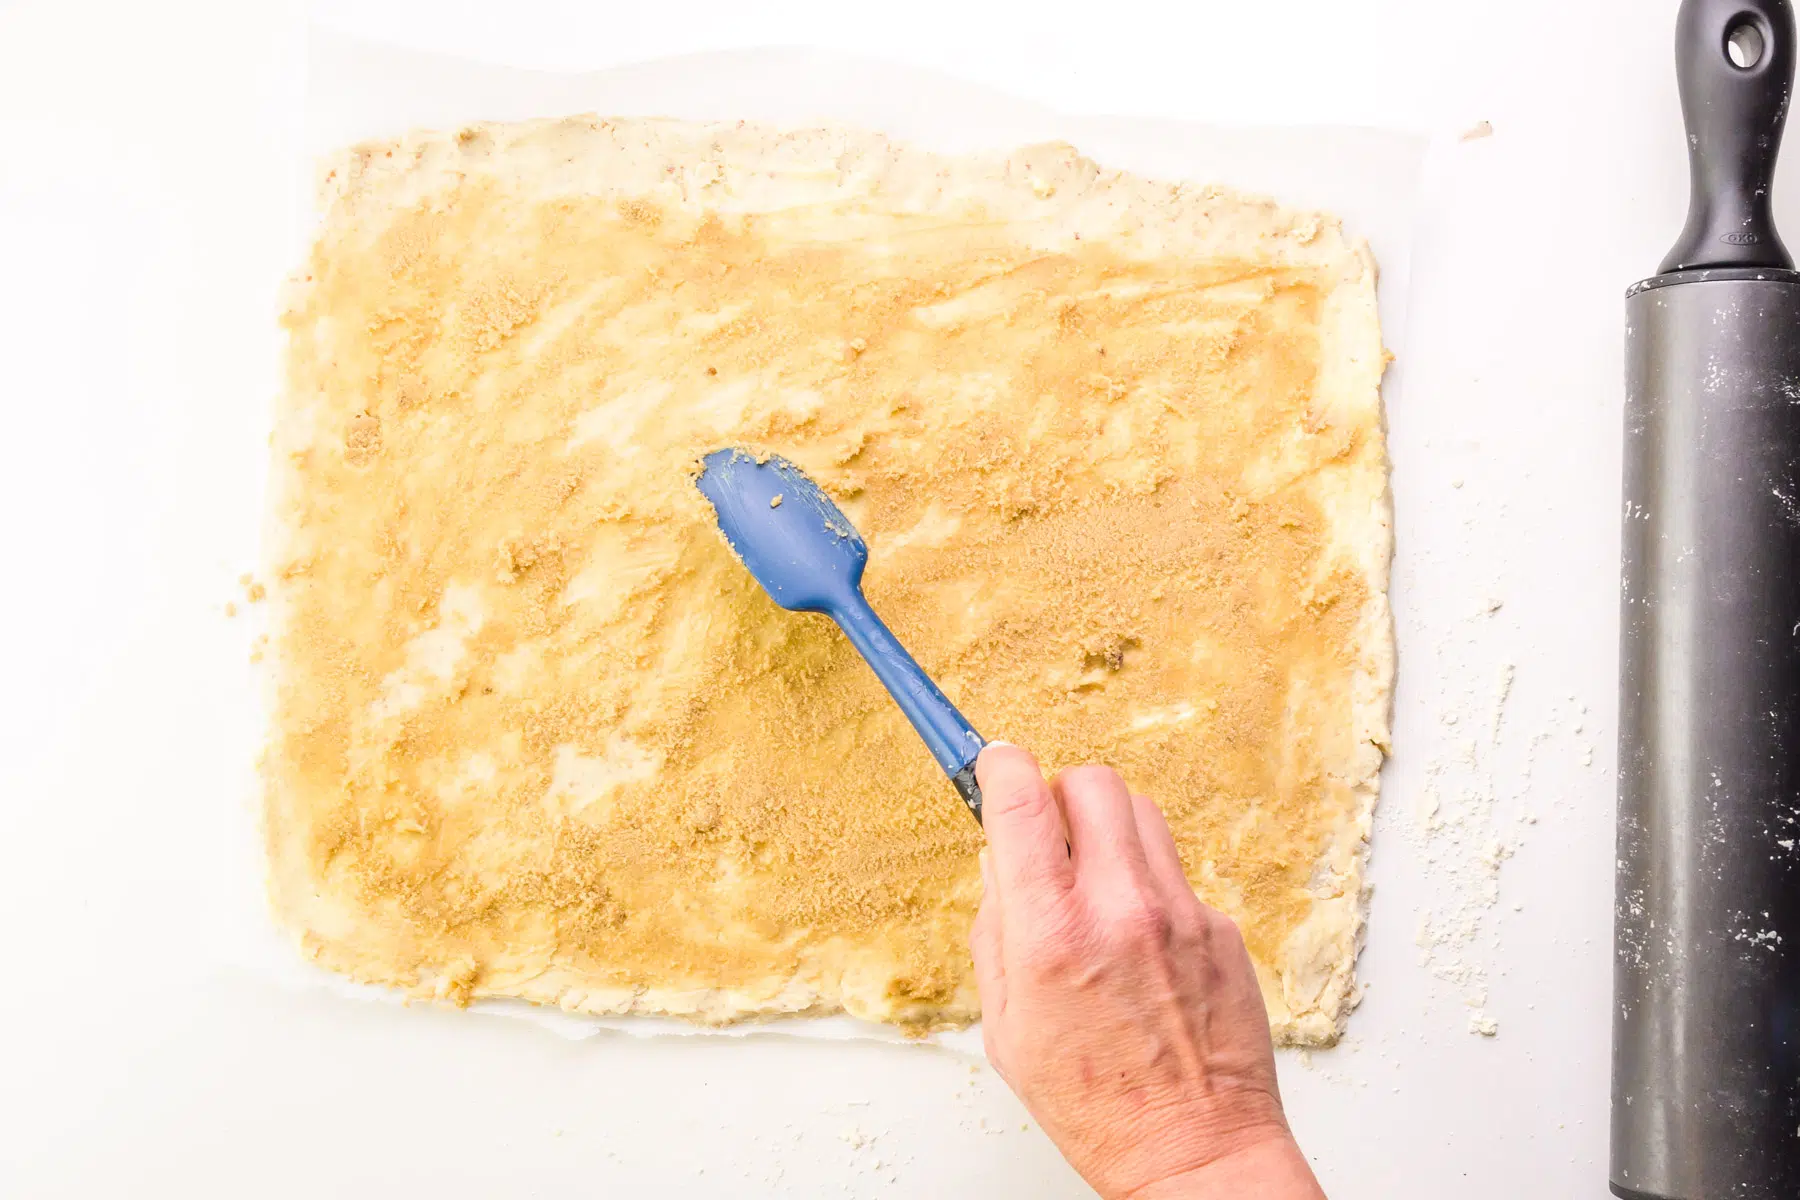 A hand holds a spatula spreading brown sugar over rolled out dough. There's a rolling pin on the right side.